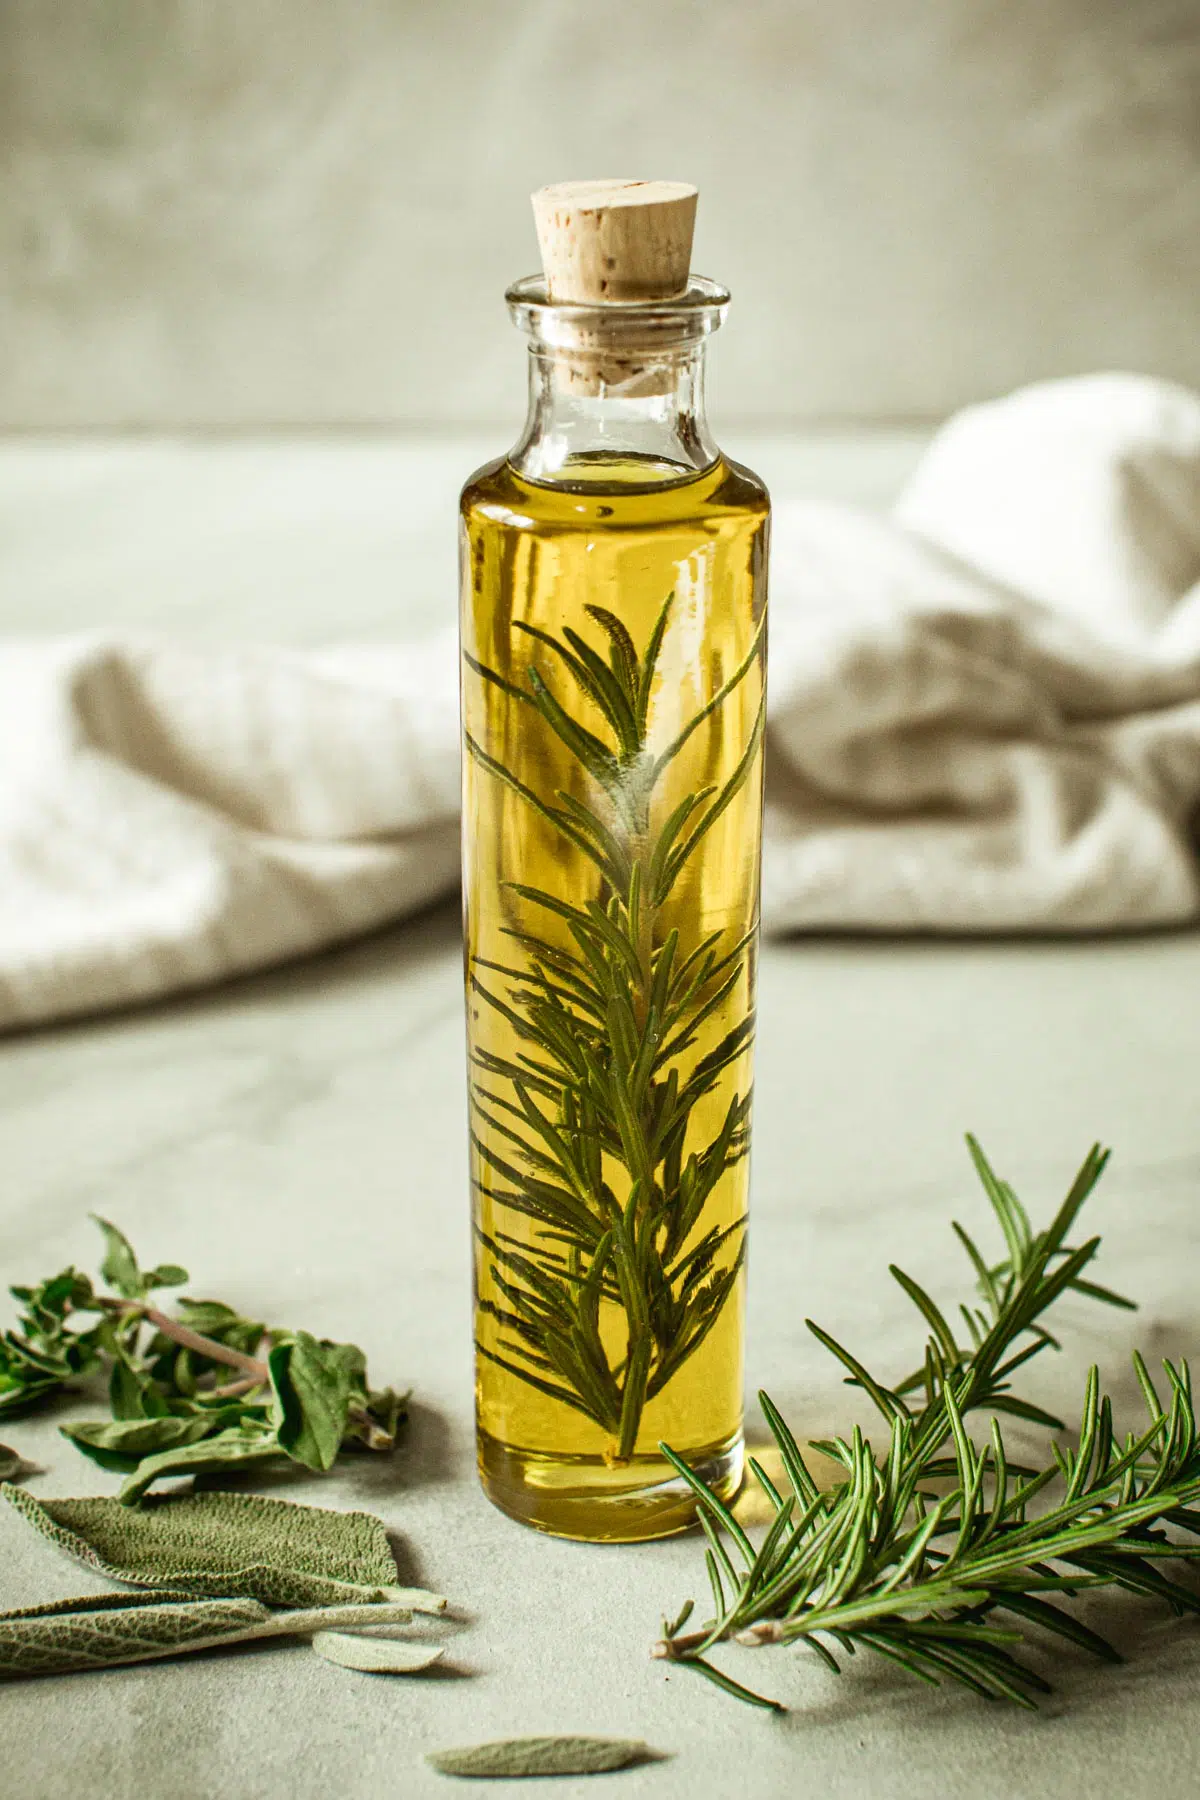 Herb infused olive oil in a bottle with a cork stopper.